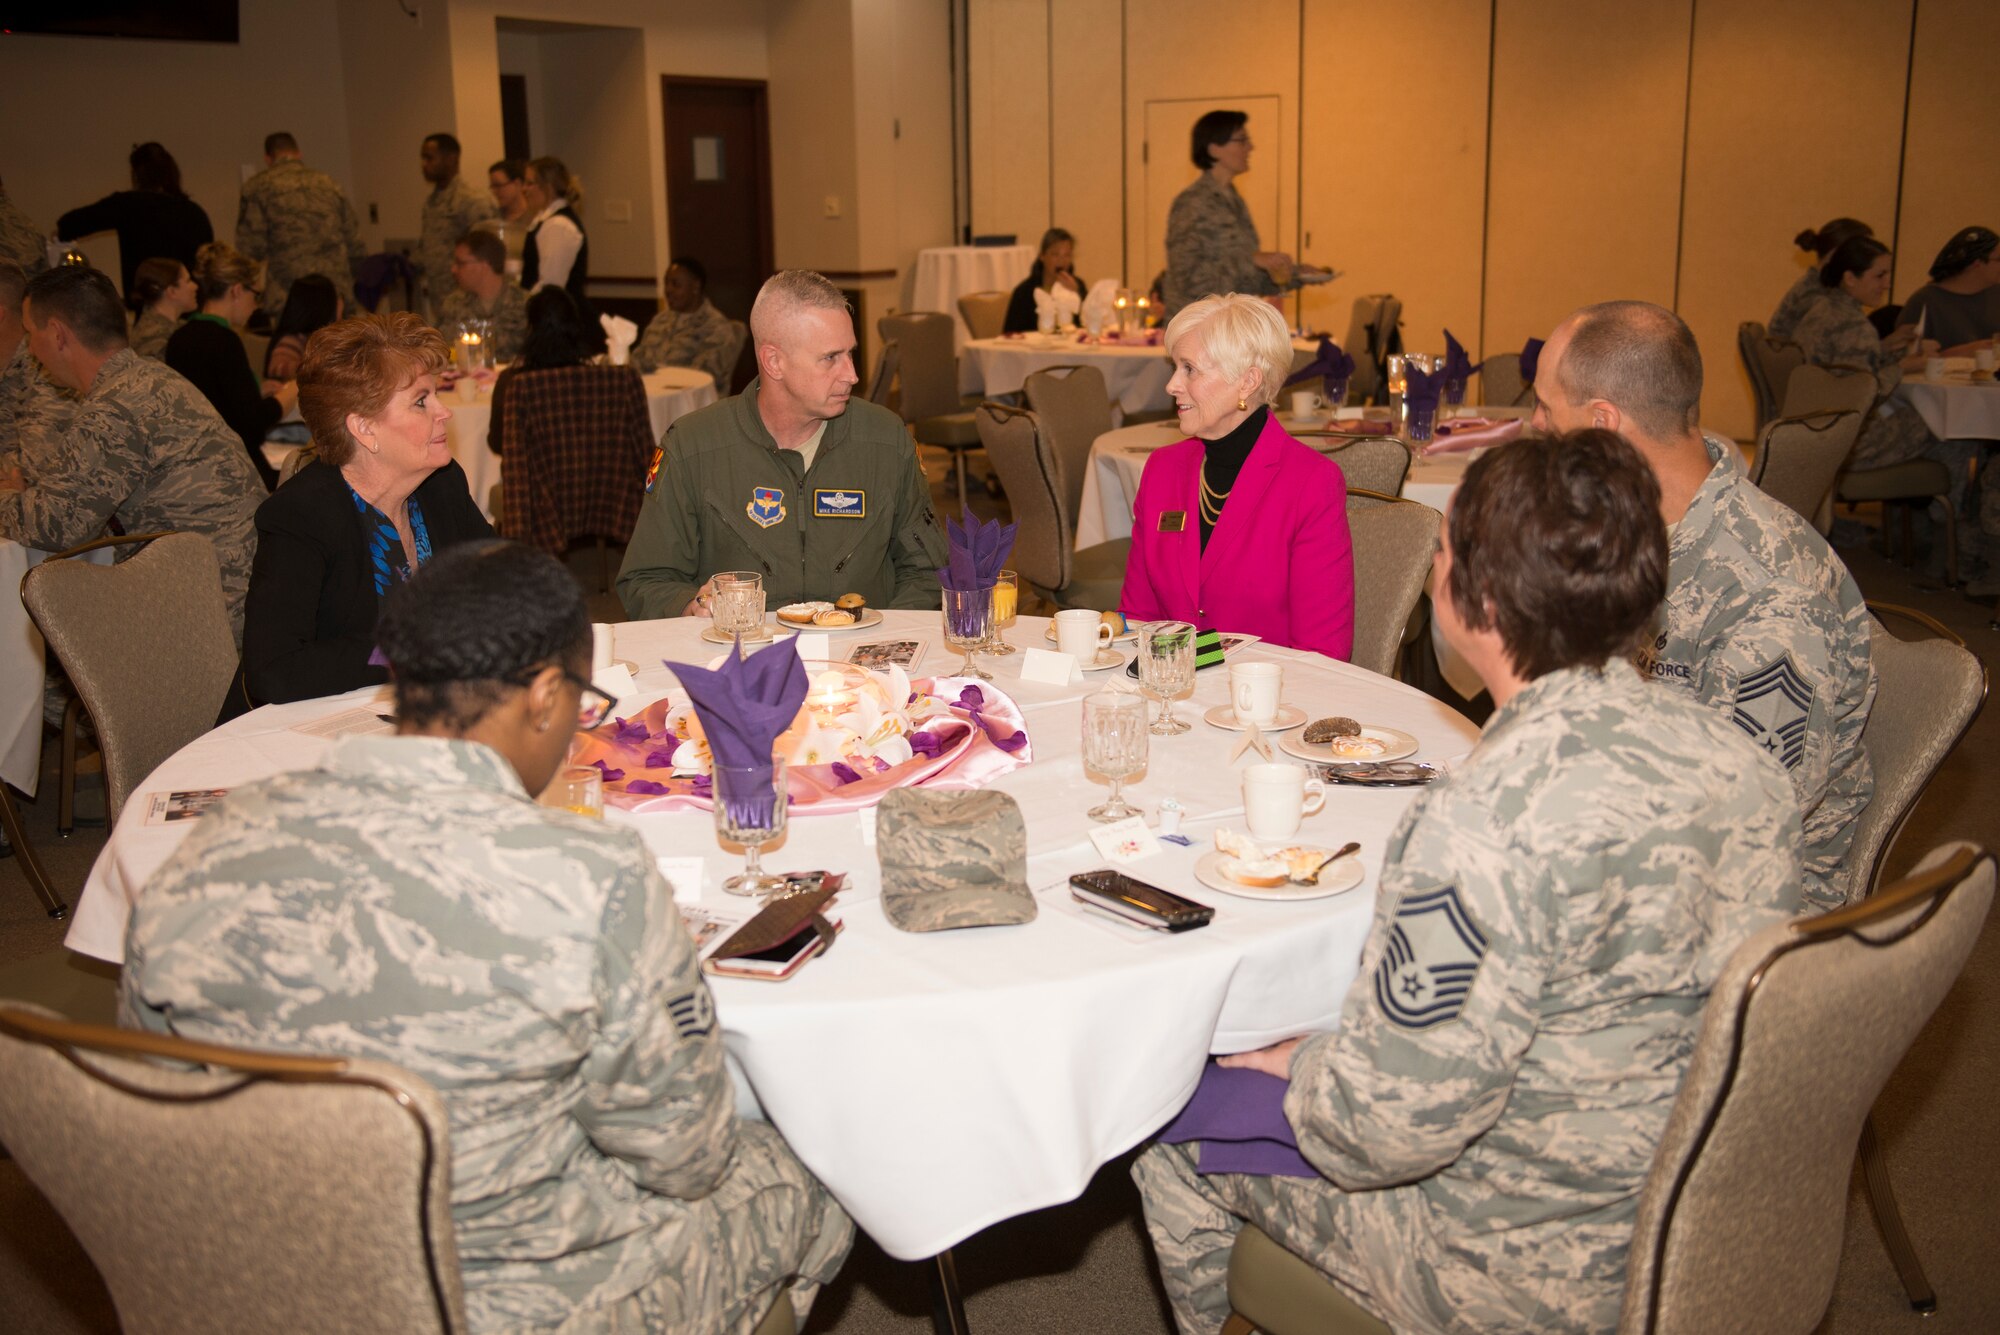 Col. Michael Richardson, 56th Fighter Wing vice commander, talks with Georgia Lord, mayor of Goodyear, and other members of the 56th Fighter Wing during the Women’s History Month breakfast at Luke Air Force Base, Ariz., March 1, 2018. The breakfast, at which Lord was a guest speaker, commemorated women’s accomplishments throughout the course of American history. (U.S. Air Force photo/Senior Airman Ridge Shan)